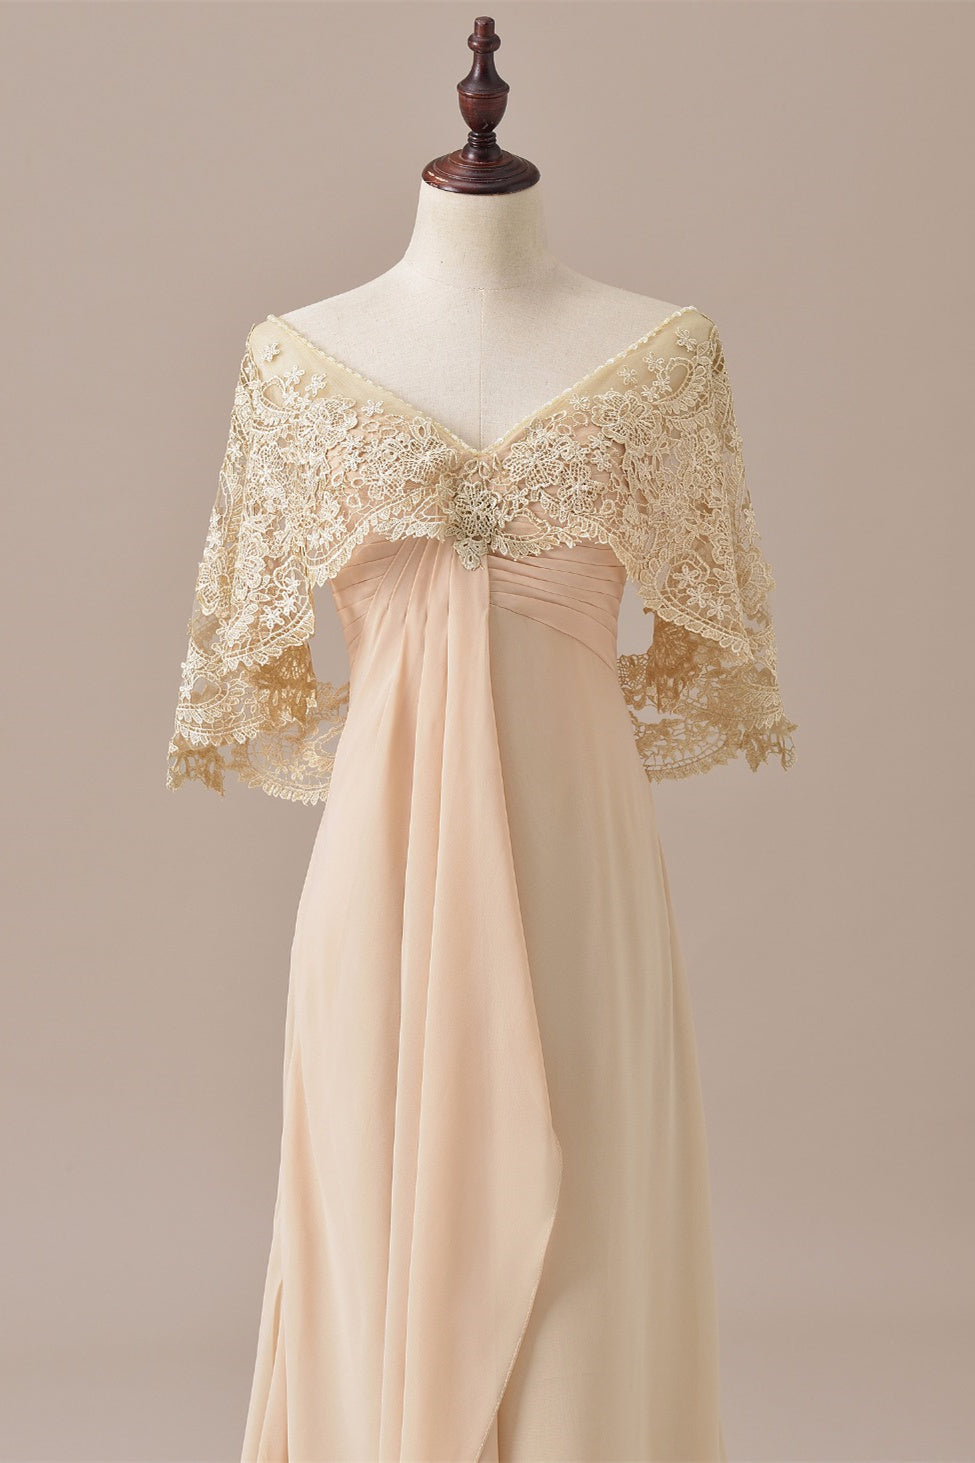 Ruffles Chiffon Long Mother of the Bride Dress with Lace Cape